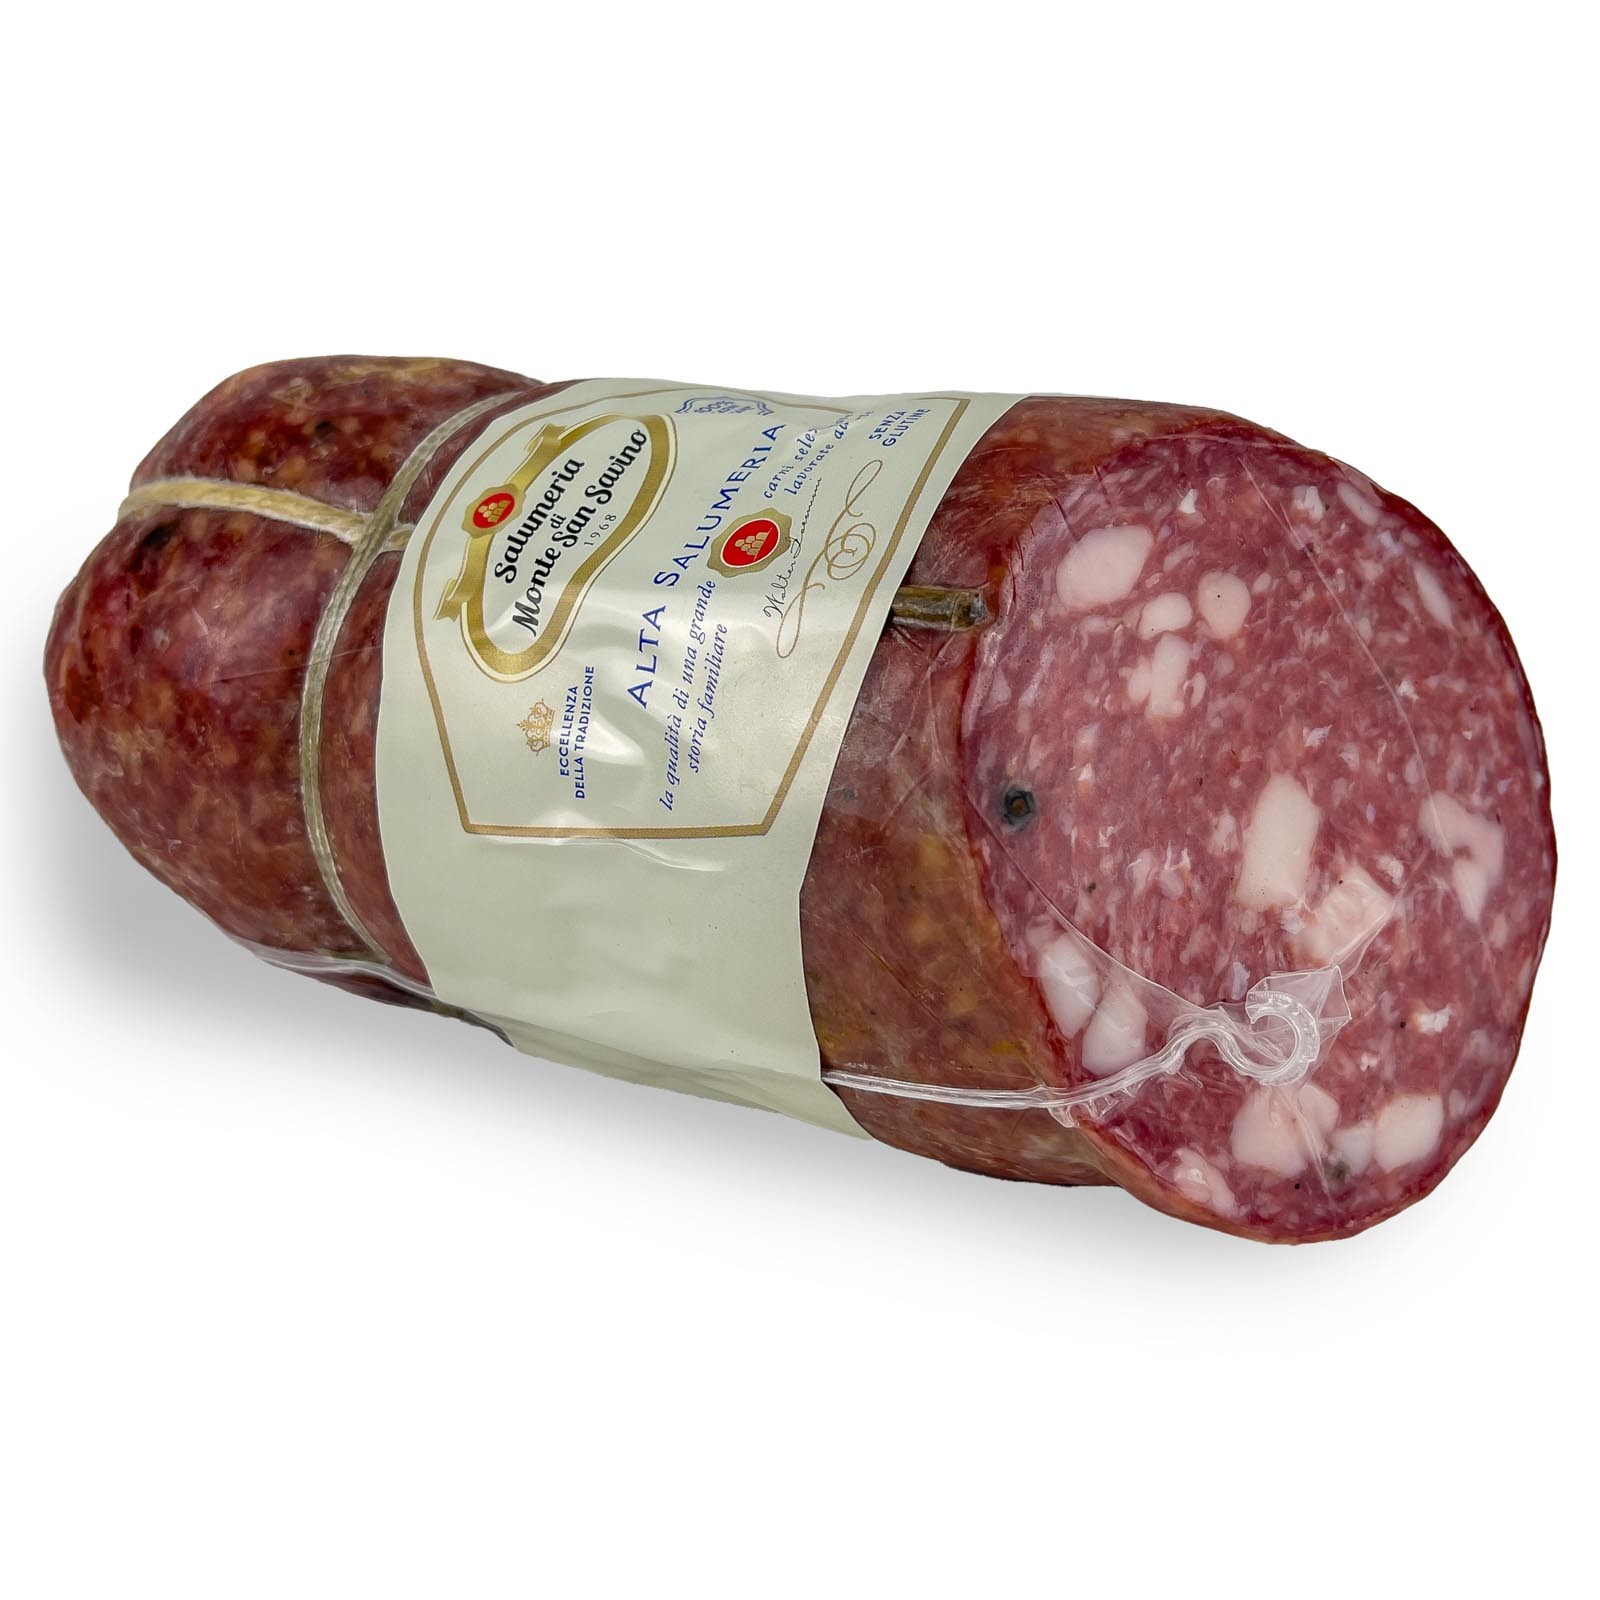 Tuscan Salami is an artisanal sausage typical of the Tuscan gastronomic tradition, made according to an ancient recipe handed down for centuries. It is characterized by a soft and compact consistency, bright red color and a particularly intense taste, enriched with spices and aromas. This version of Tuscan Salami has a net weight of about 1,5 kg, is vacuum packed and is characterized by a large slice of about 12 centimeters in diameter.